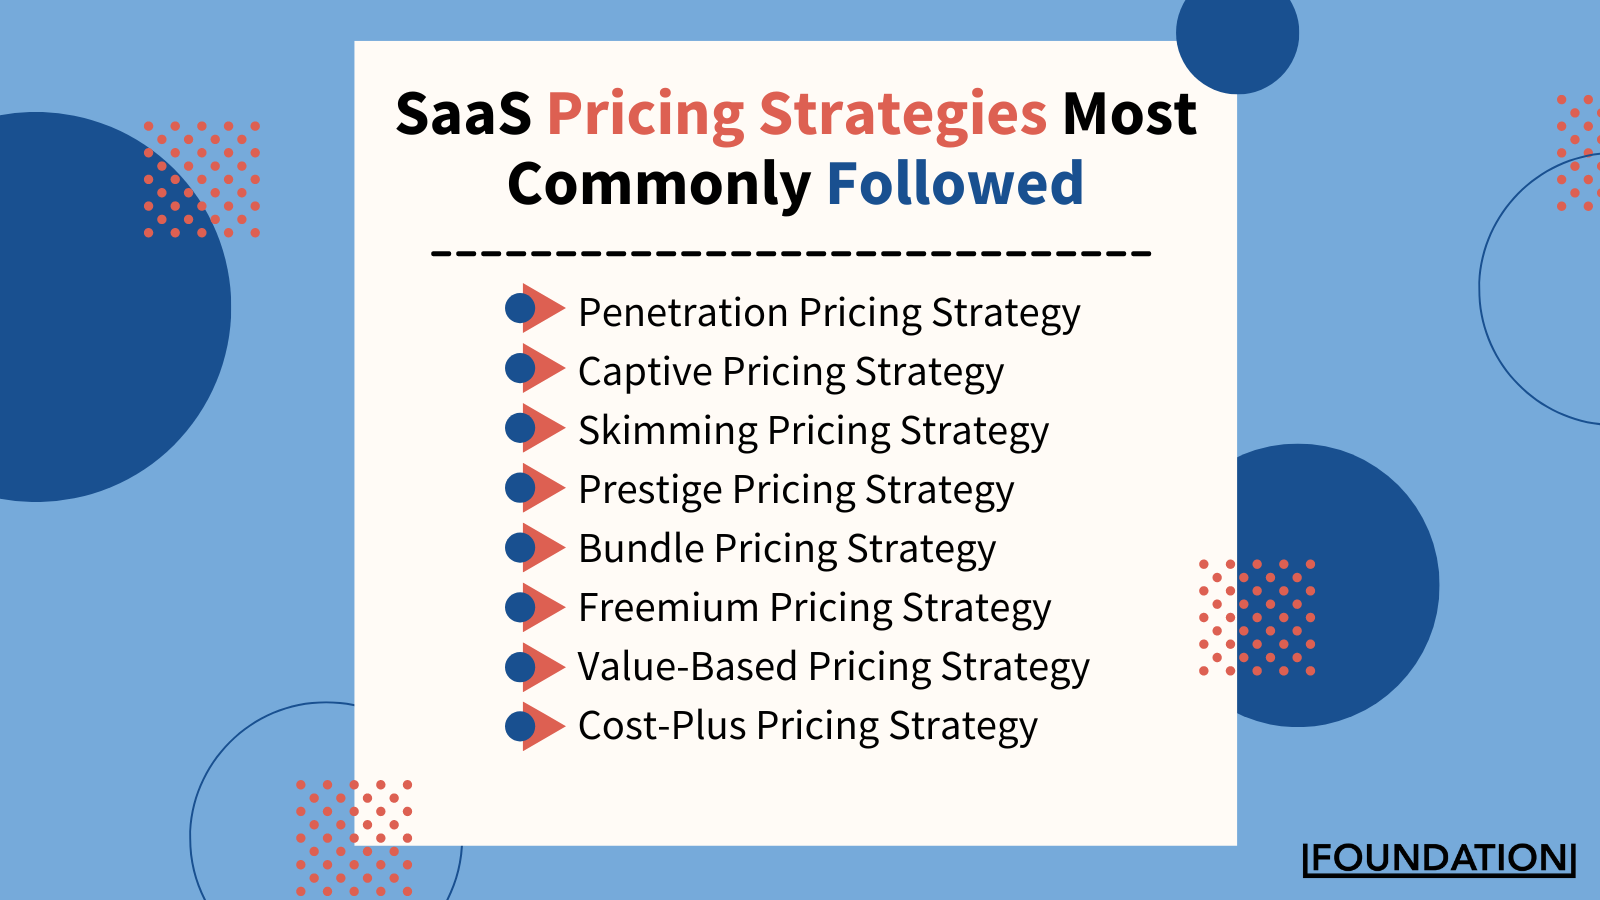 SaaS Pricing Strategies Most Commonly Followed